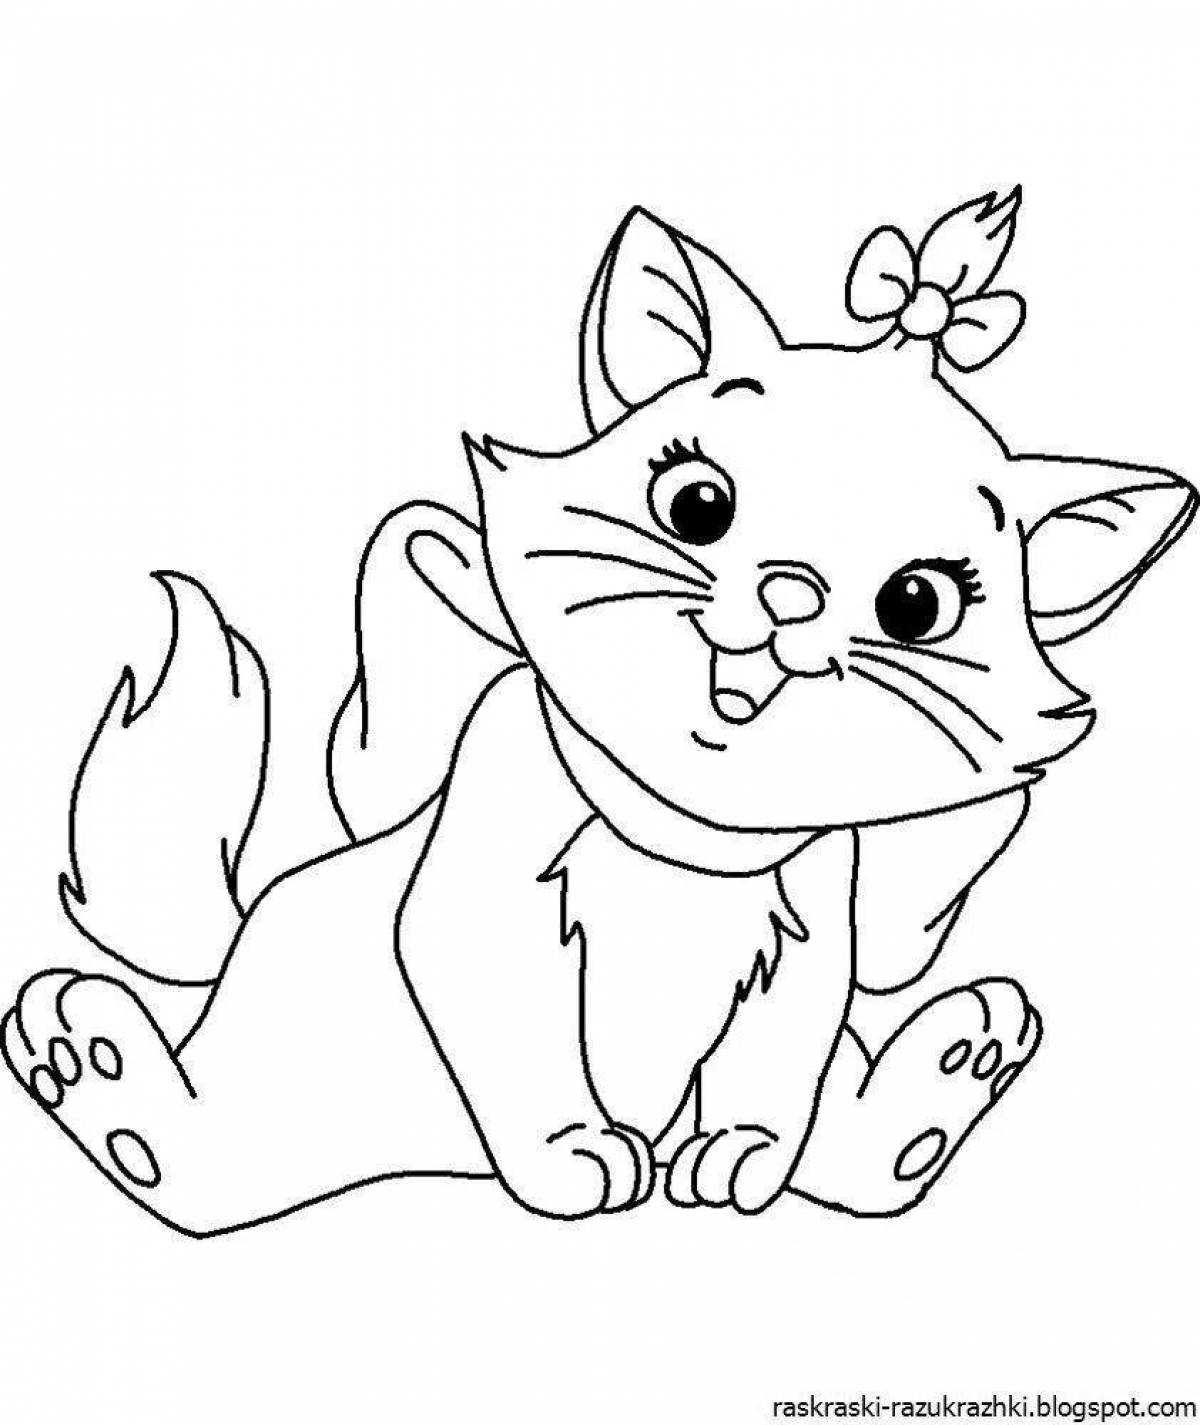 Rainbow kitten coloring for children 3-4 years old